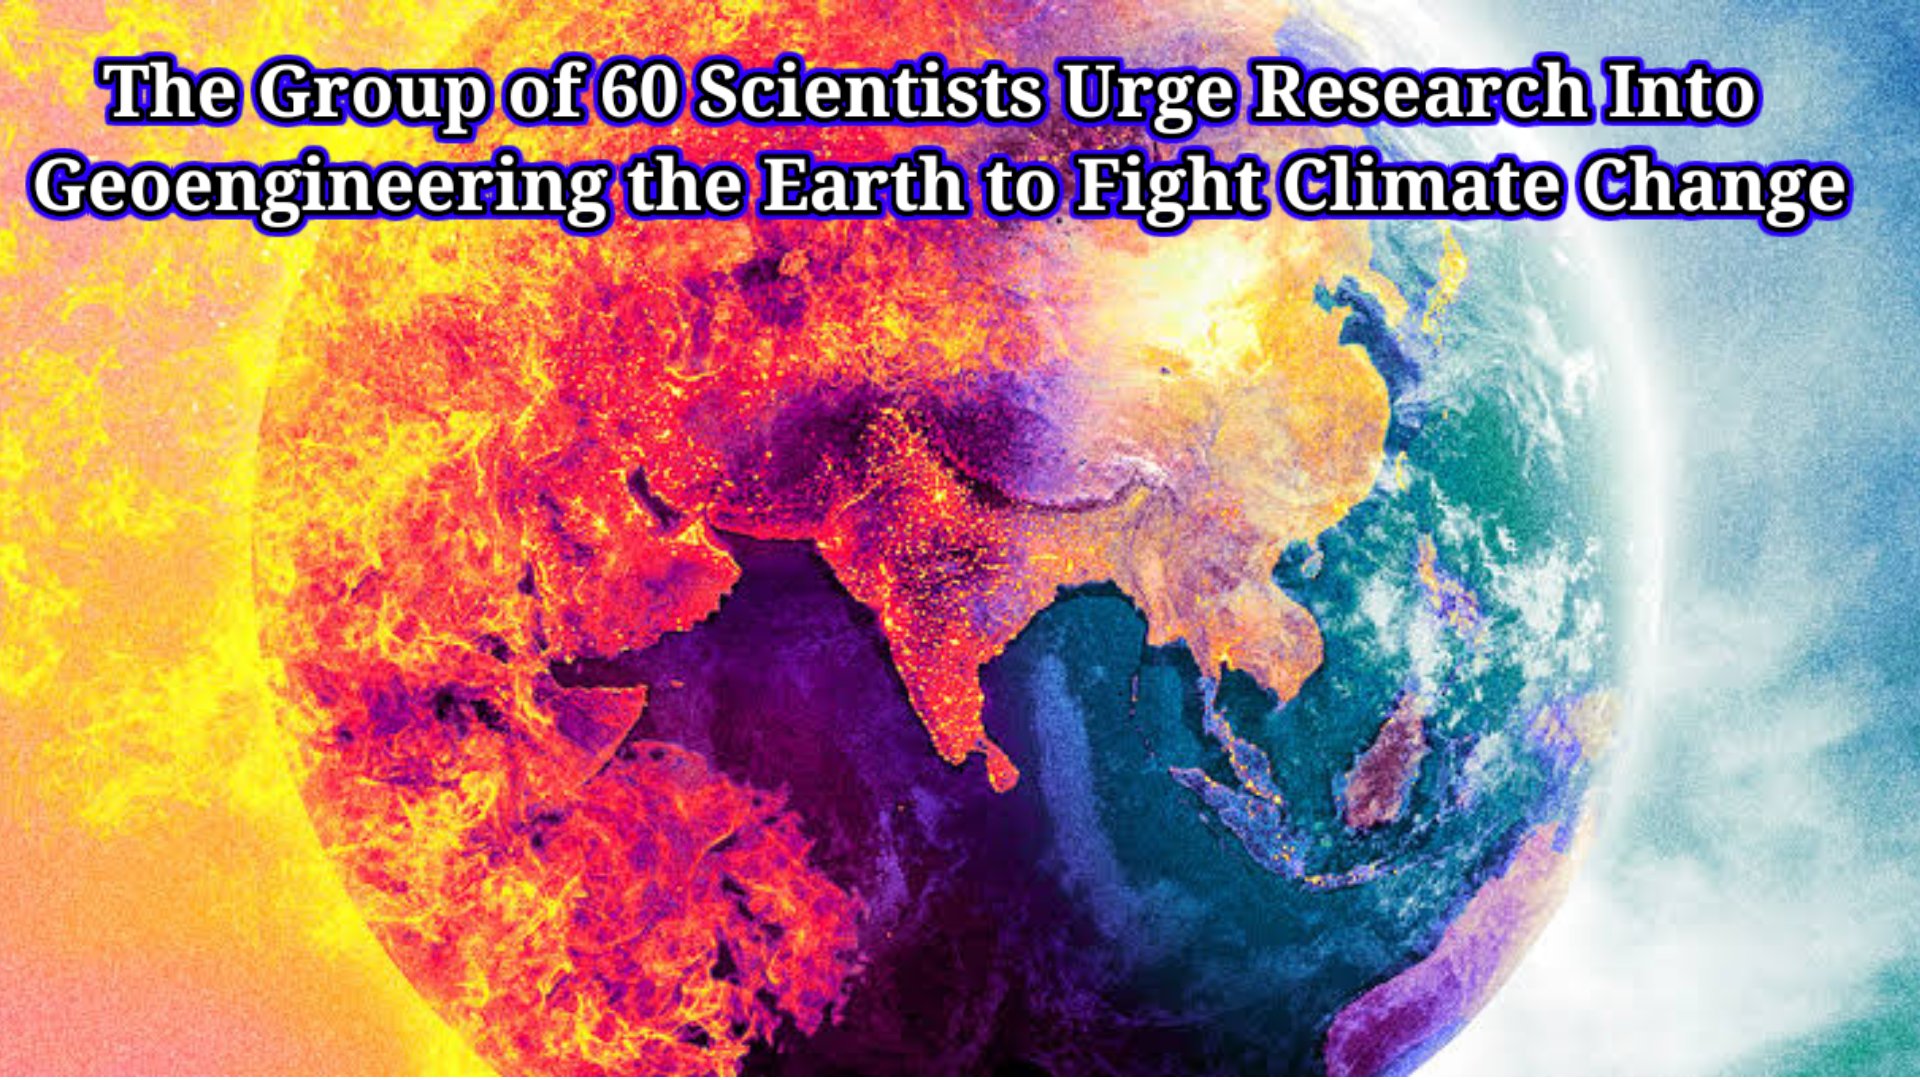 Group of 60 Scientists Urge Research Into Geoengineering the Earth to Fight Climate Change